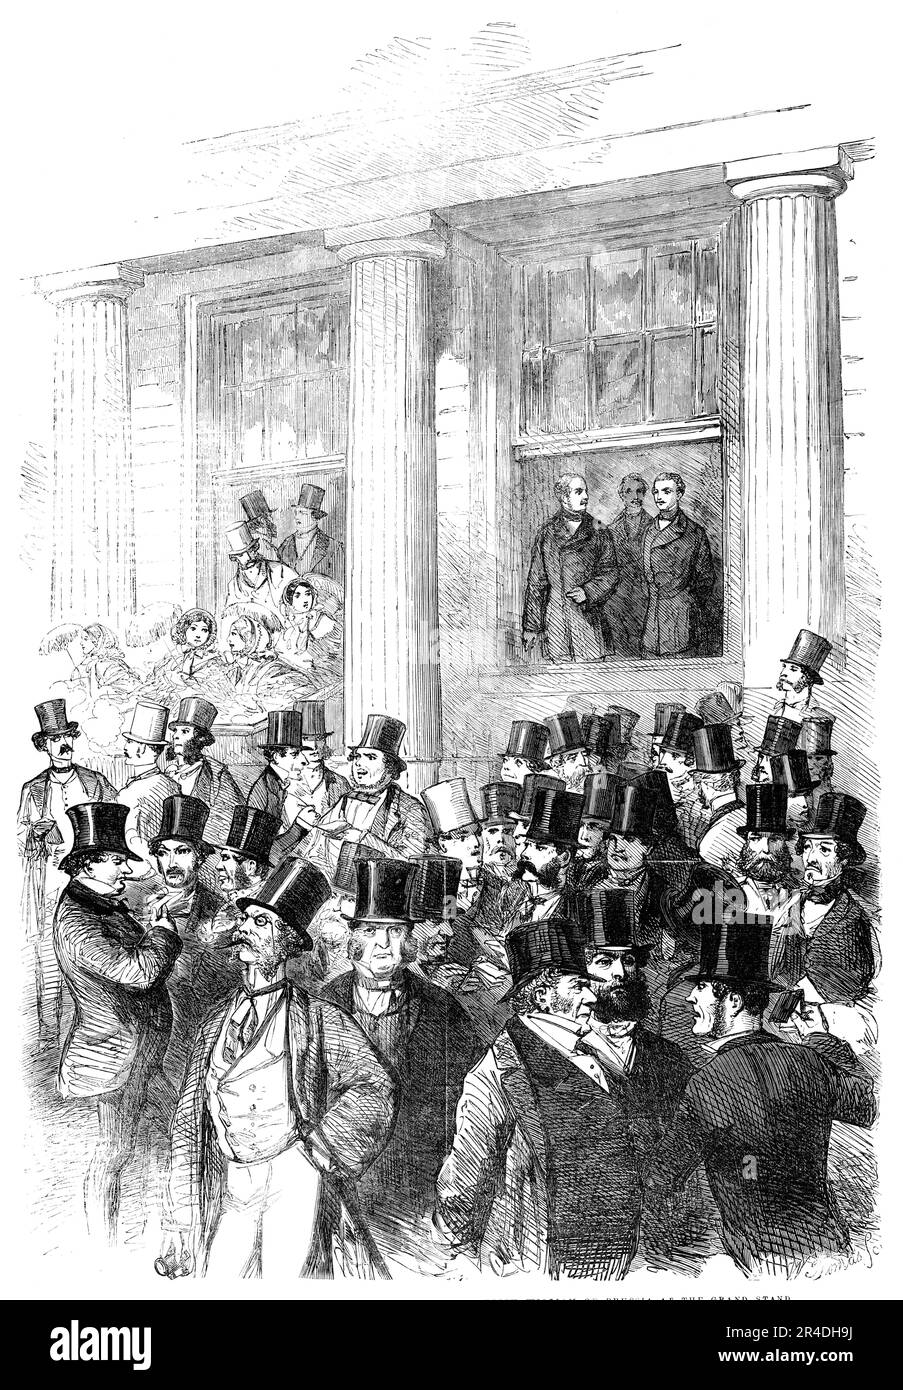 Epsom Races - H.R.H. Prince Albert and H.R.H. Prince Frederick William of Prussia at the Grand Stand, 1856. 'Although there was no cheering there was no lack of curiosity to obtain a glimpse of the future husband of the eldest daughter of our beloved Queen. The Royal visitors appeared to take great interest in the race for the Derby; but perhaps what astonished them the most was the excitement of the Betting Ring, and the extraordinary coup-d'oeil presented by the immense numbers on the ground, amongst whom the utmost order everywhere prevailed. They left the course immediately after the great Stock Photo